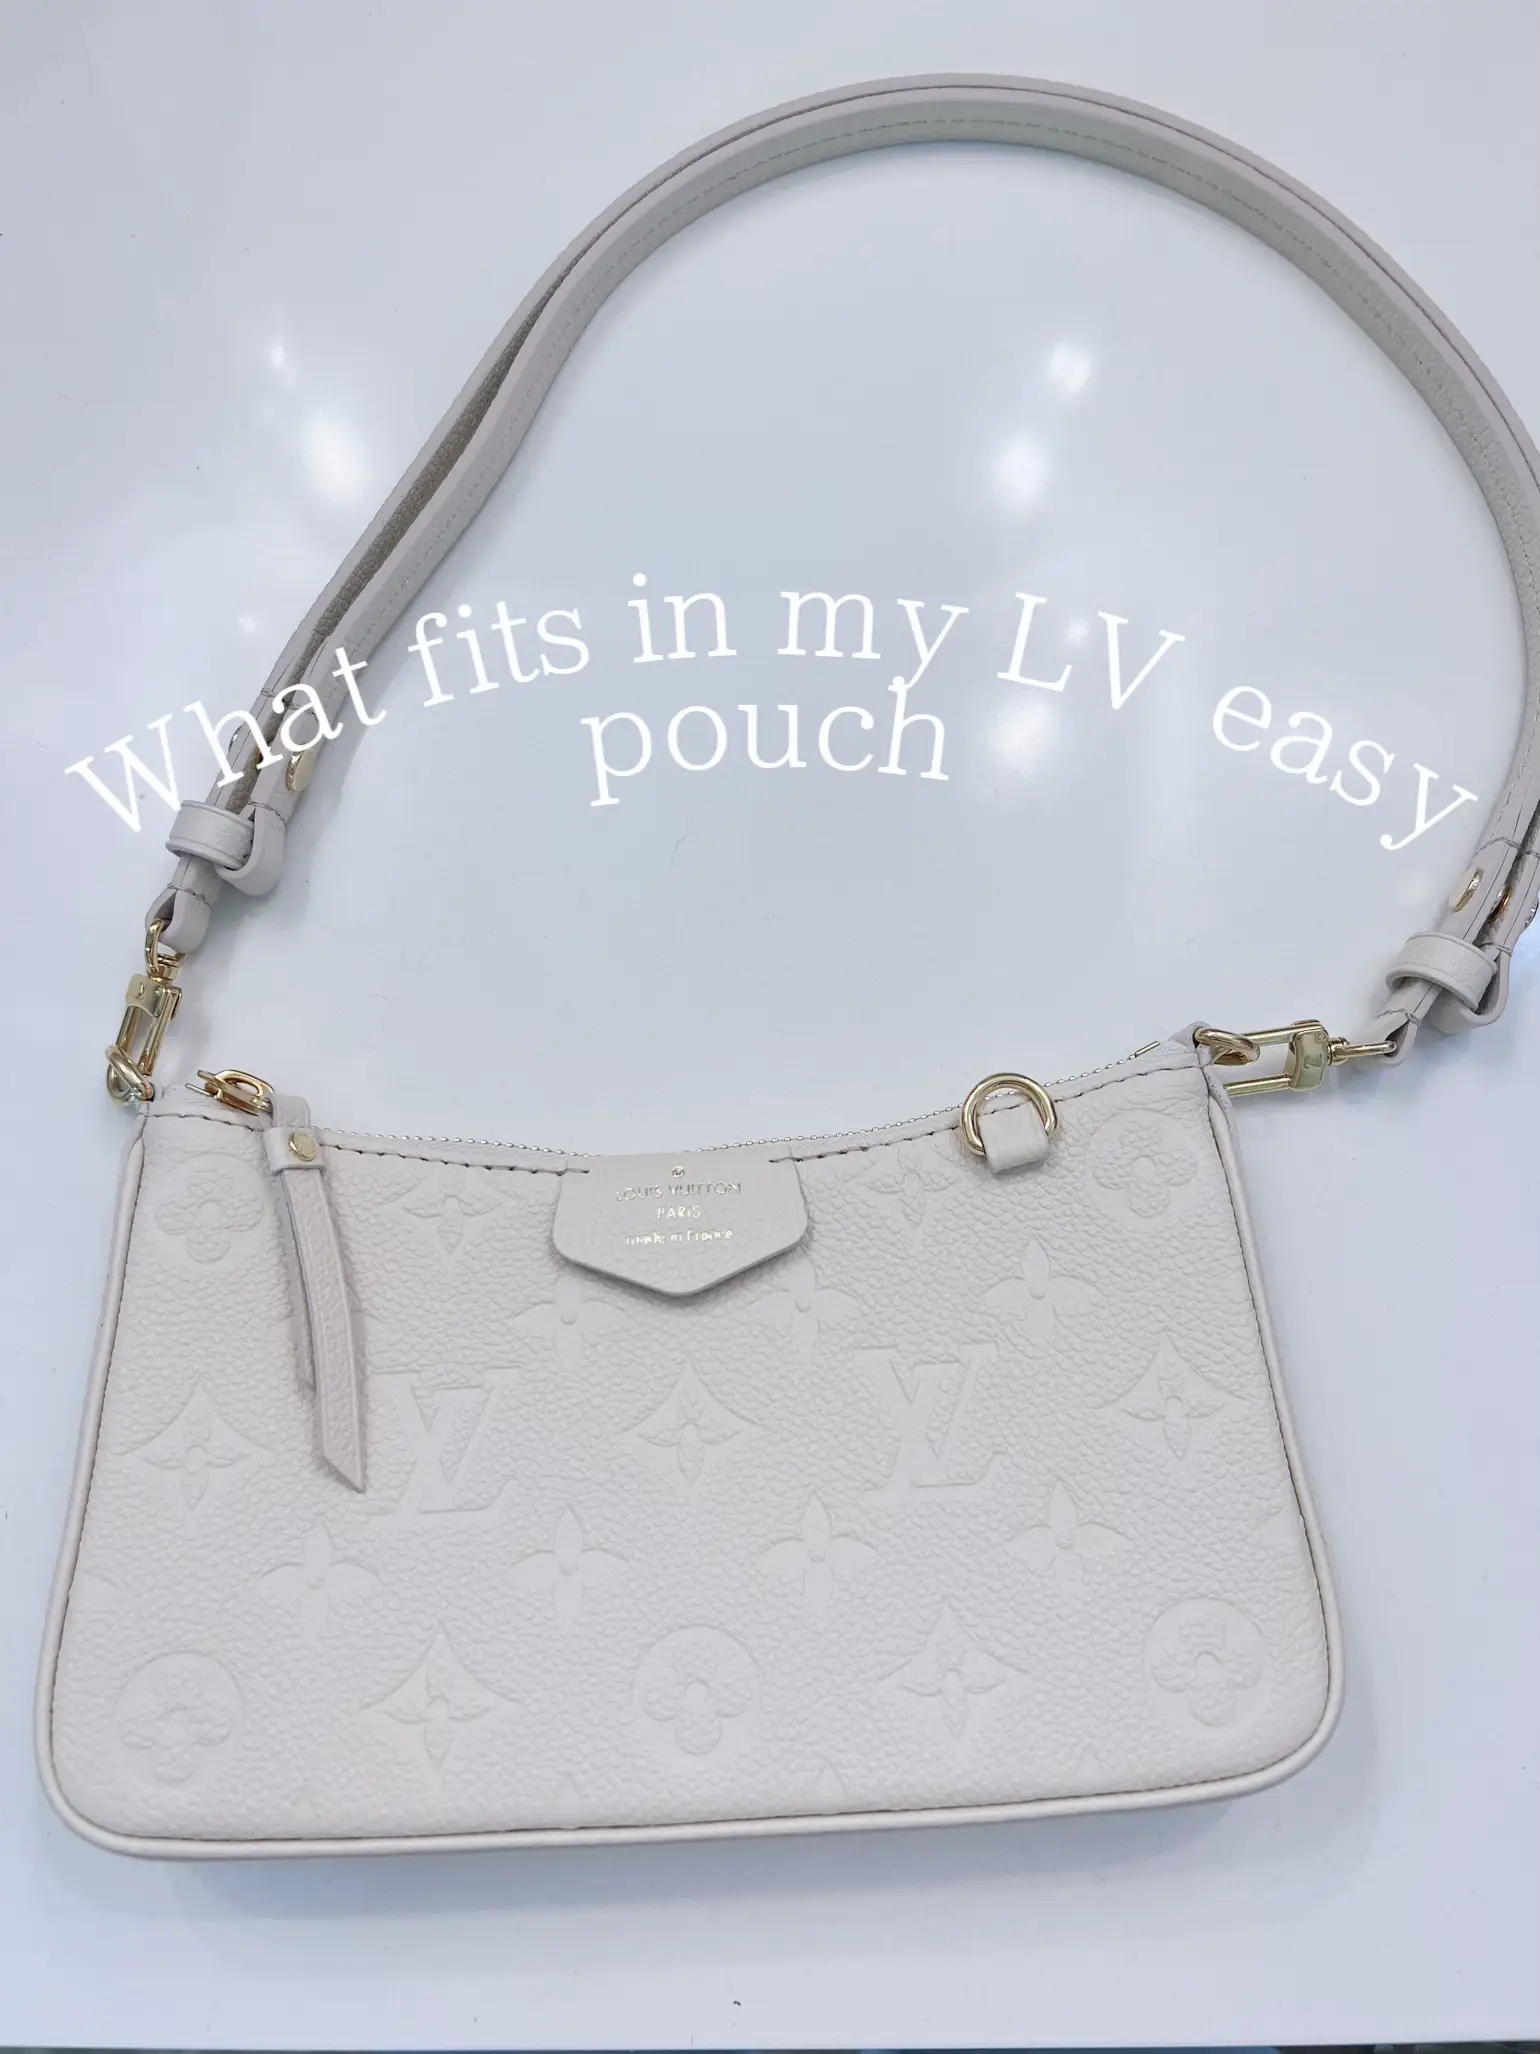 I loooove the the easy pouch in the new color!!! #louisvuitton